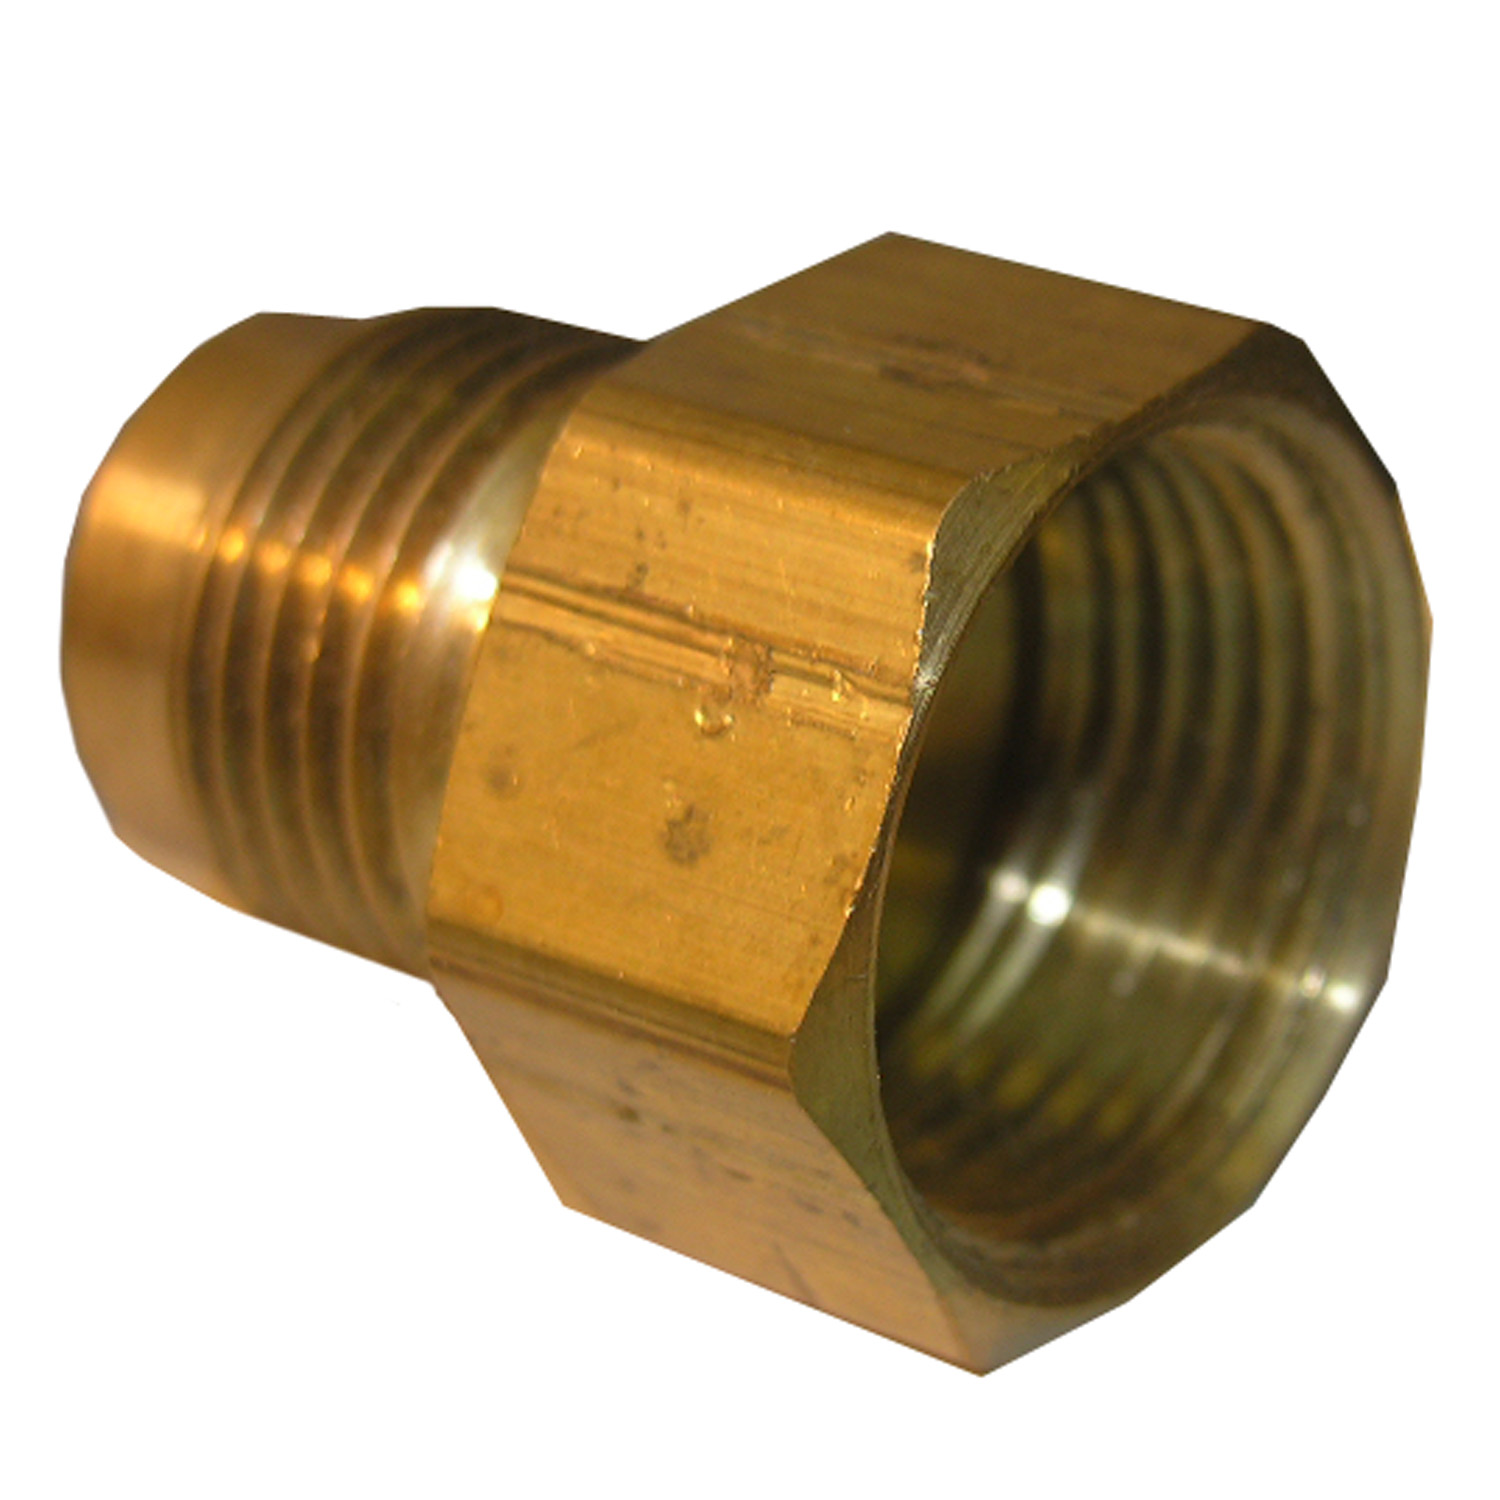 17-4659 Pipe Adapter, 5/8 x 3/4 in, Male Flare x FPT, Brass, 640 psi Pressure